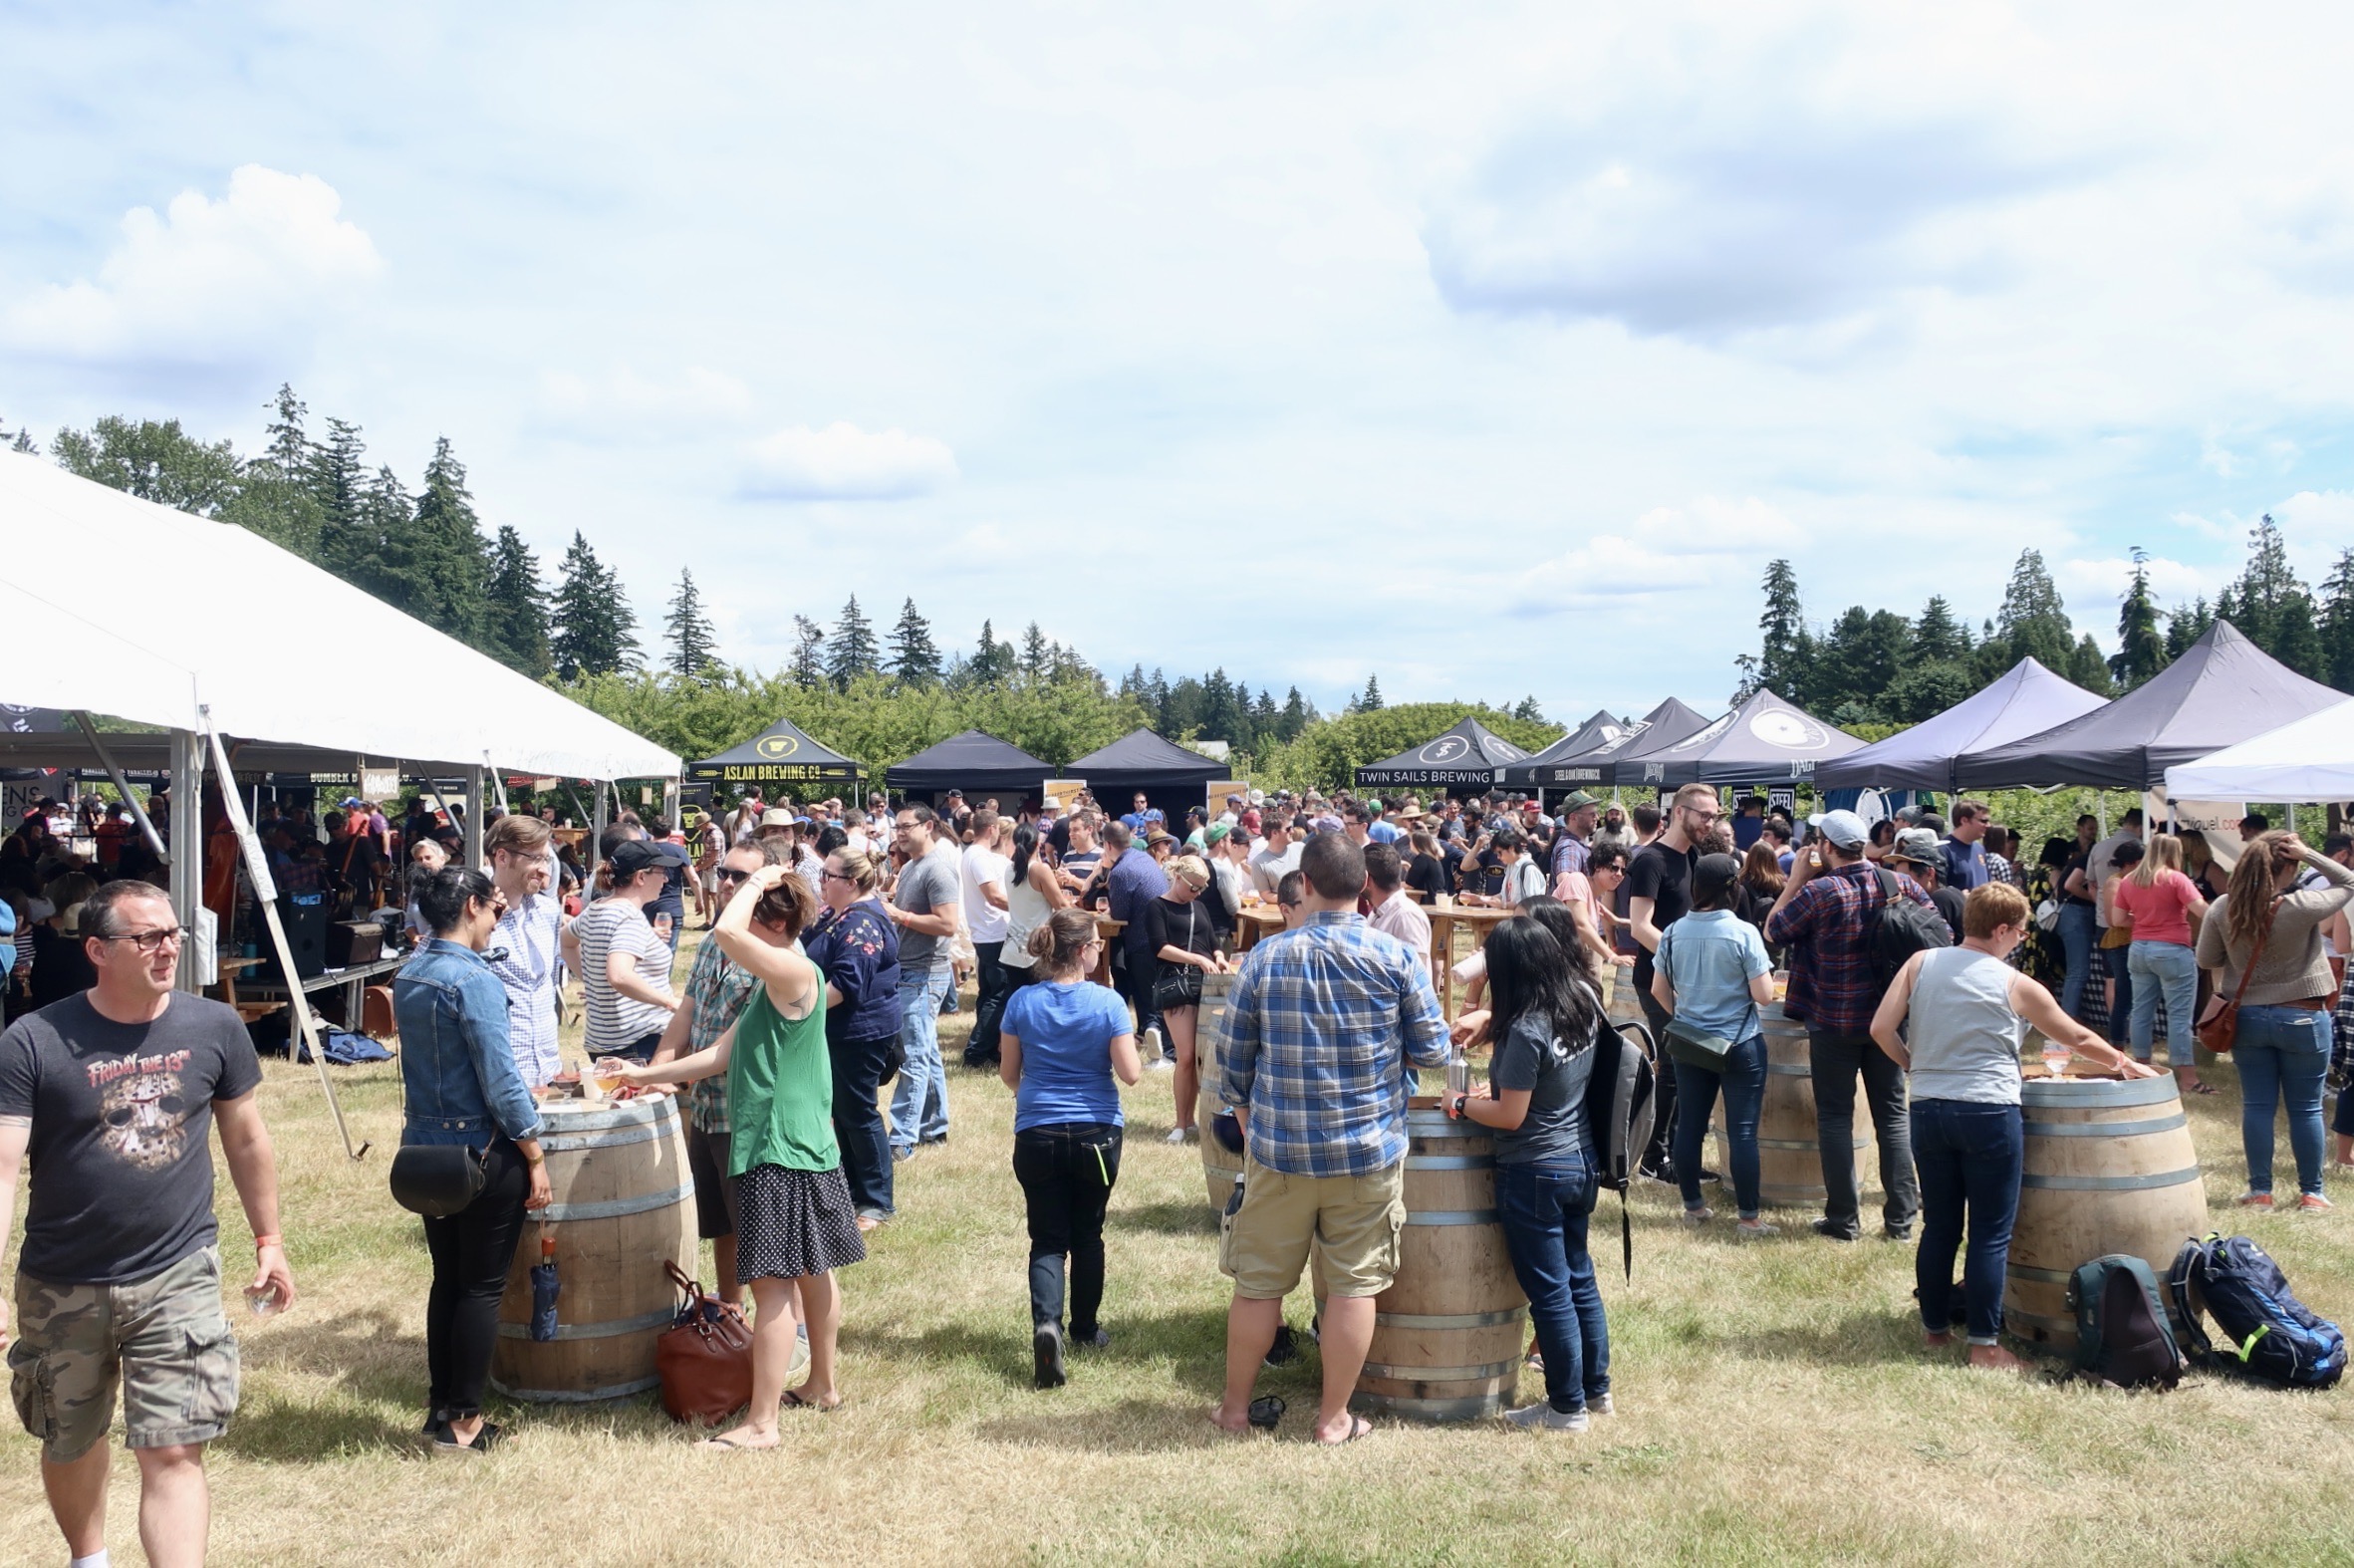 The festive crowd at Farmhouse Fest in Vancouver, BC.